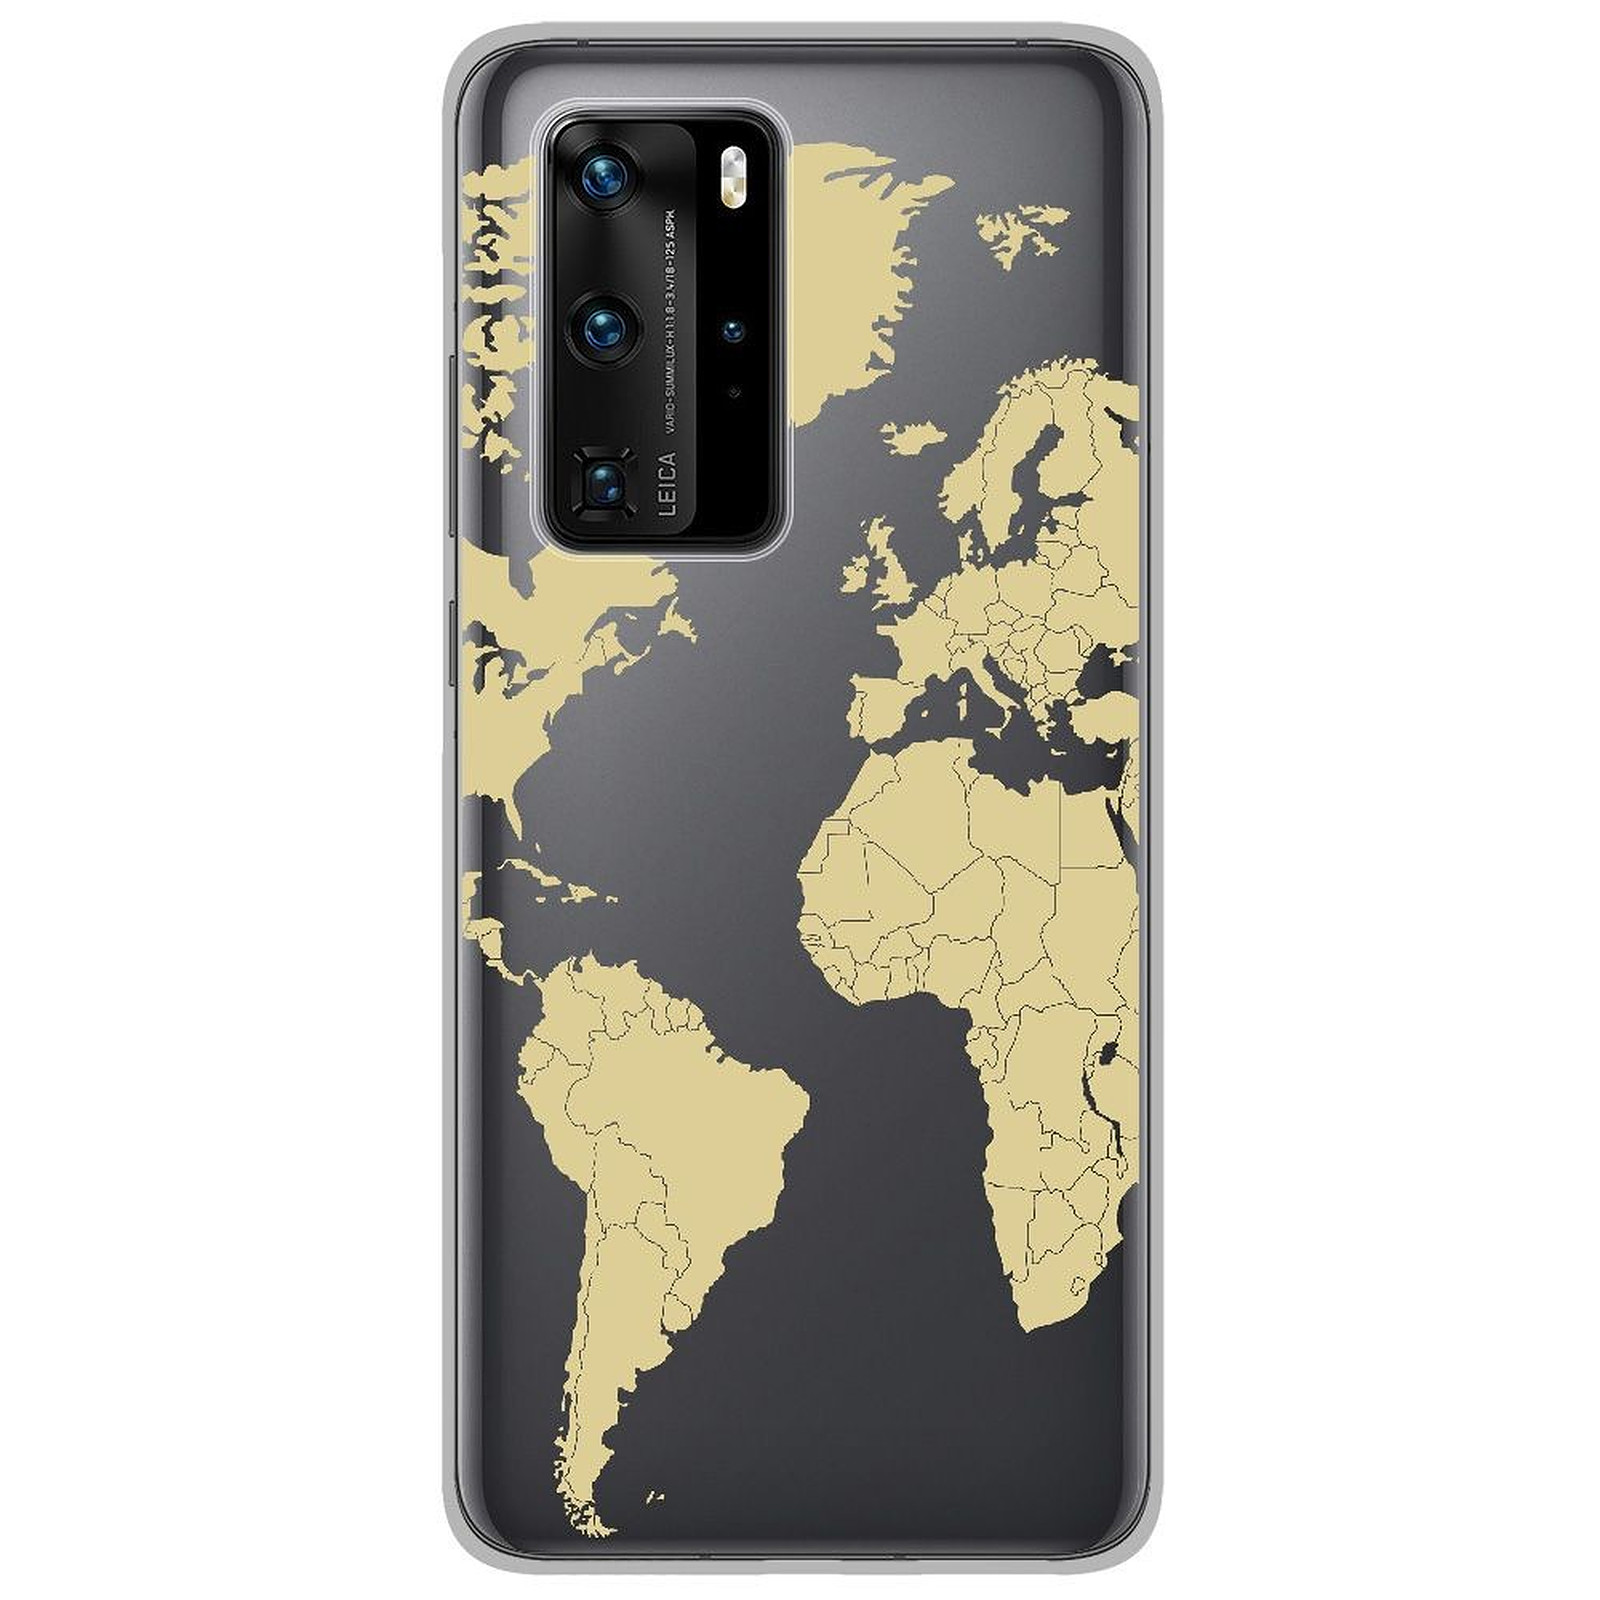 1001 Coques Coque silicone gel Huawei P40 Pro motif Map beige - Coque telephone 1001Coques